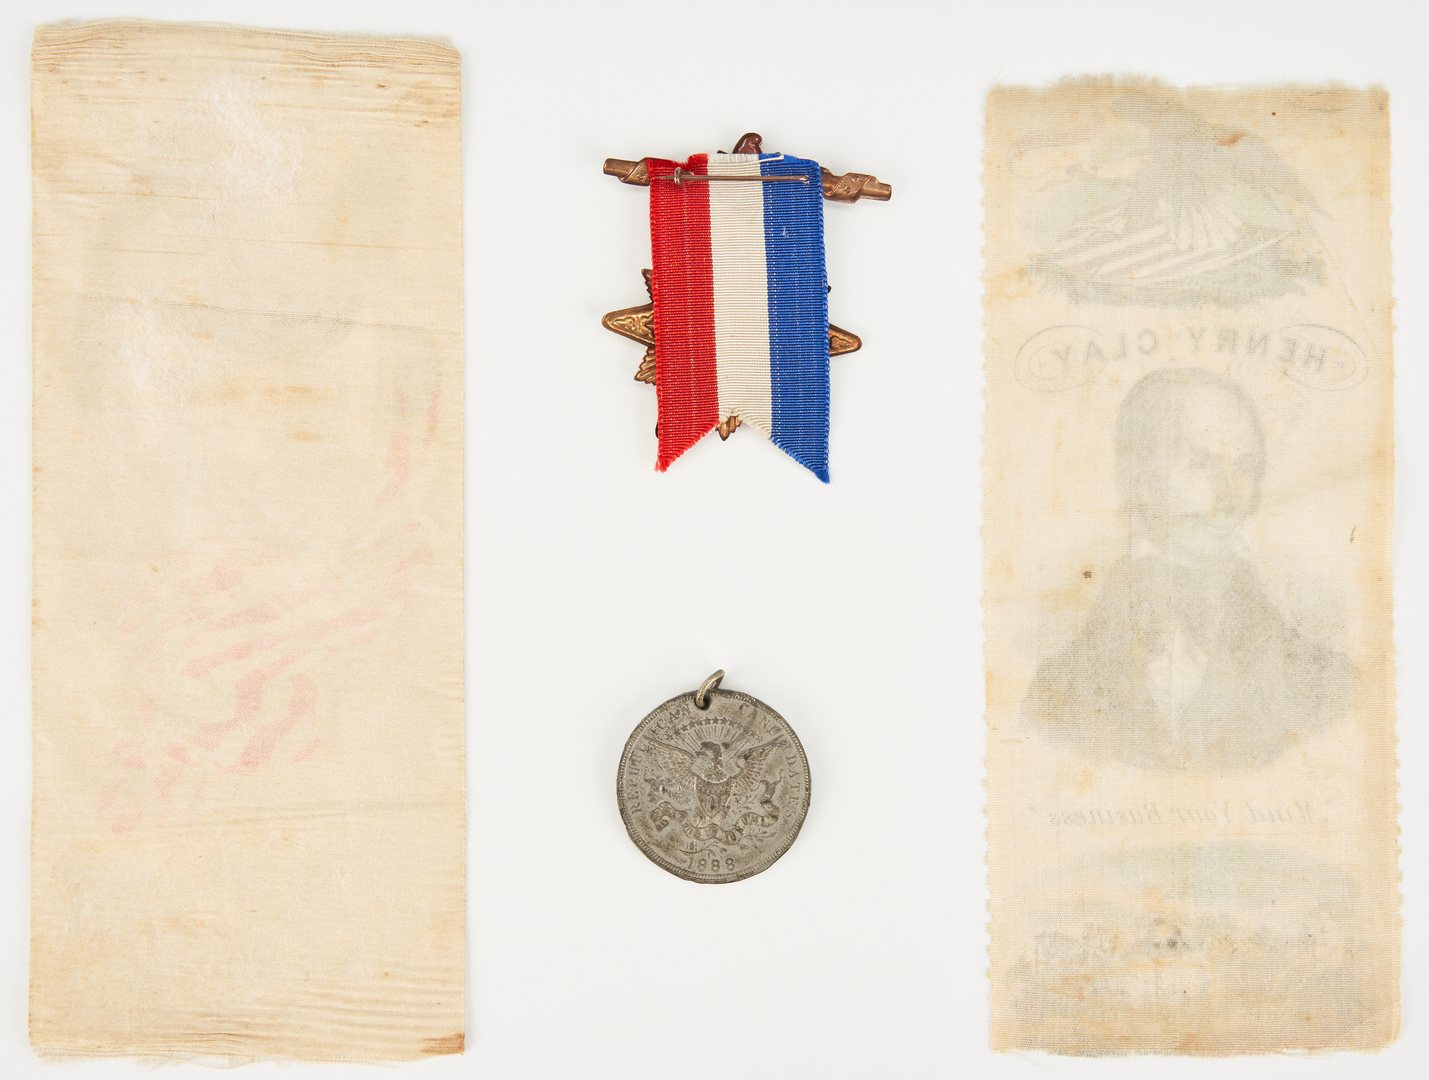 Lot 656: 4 Political Items, incl. Henry Clay Ribbon, 1844